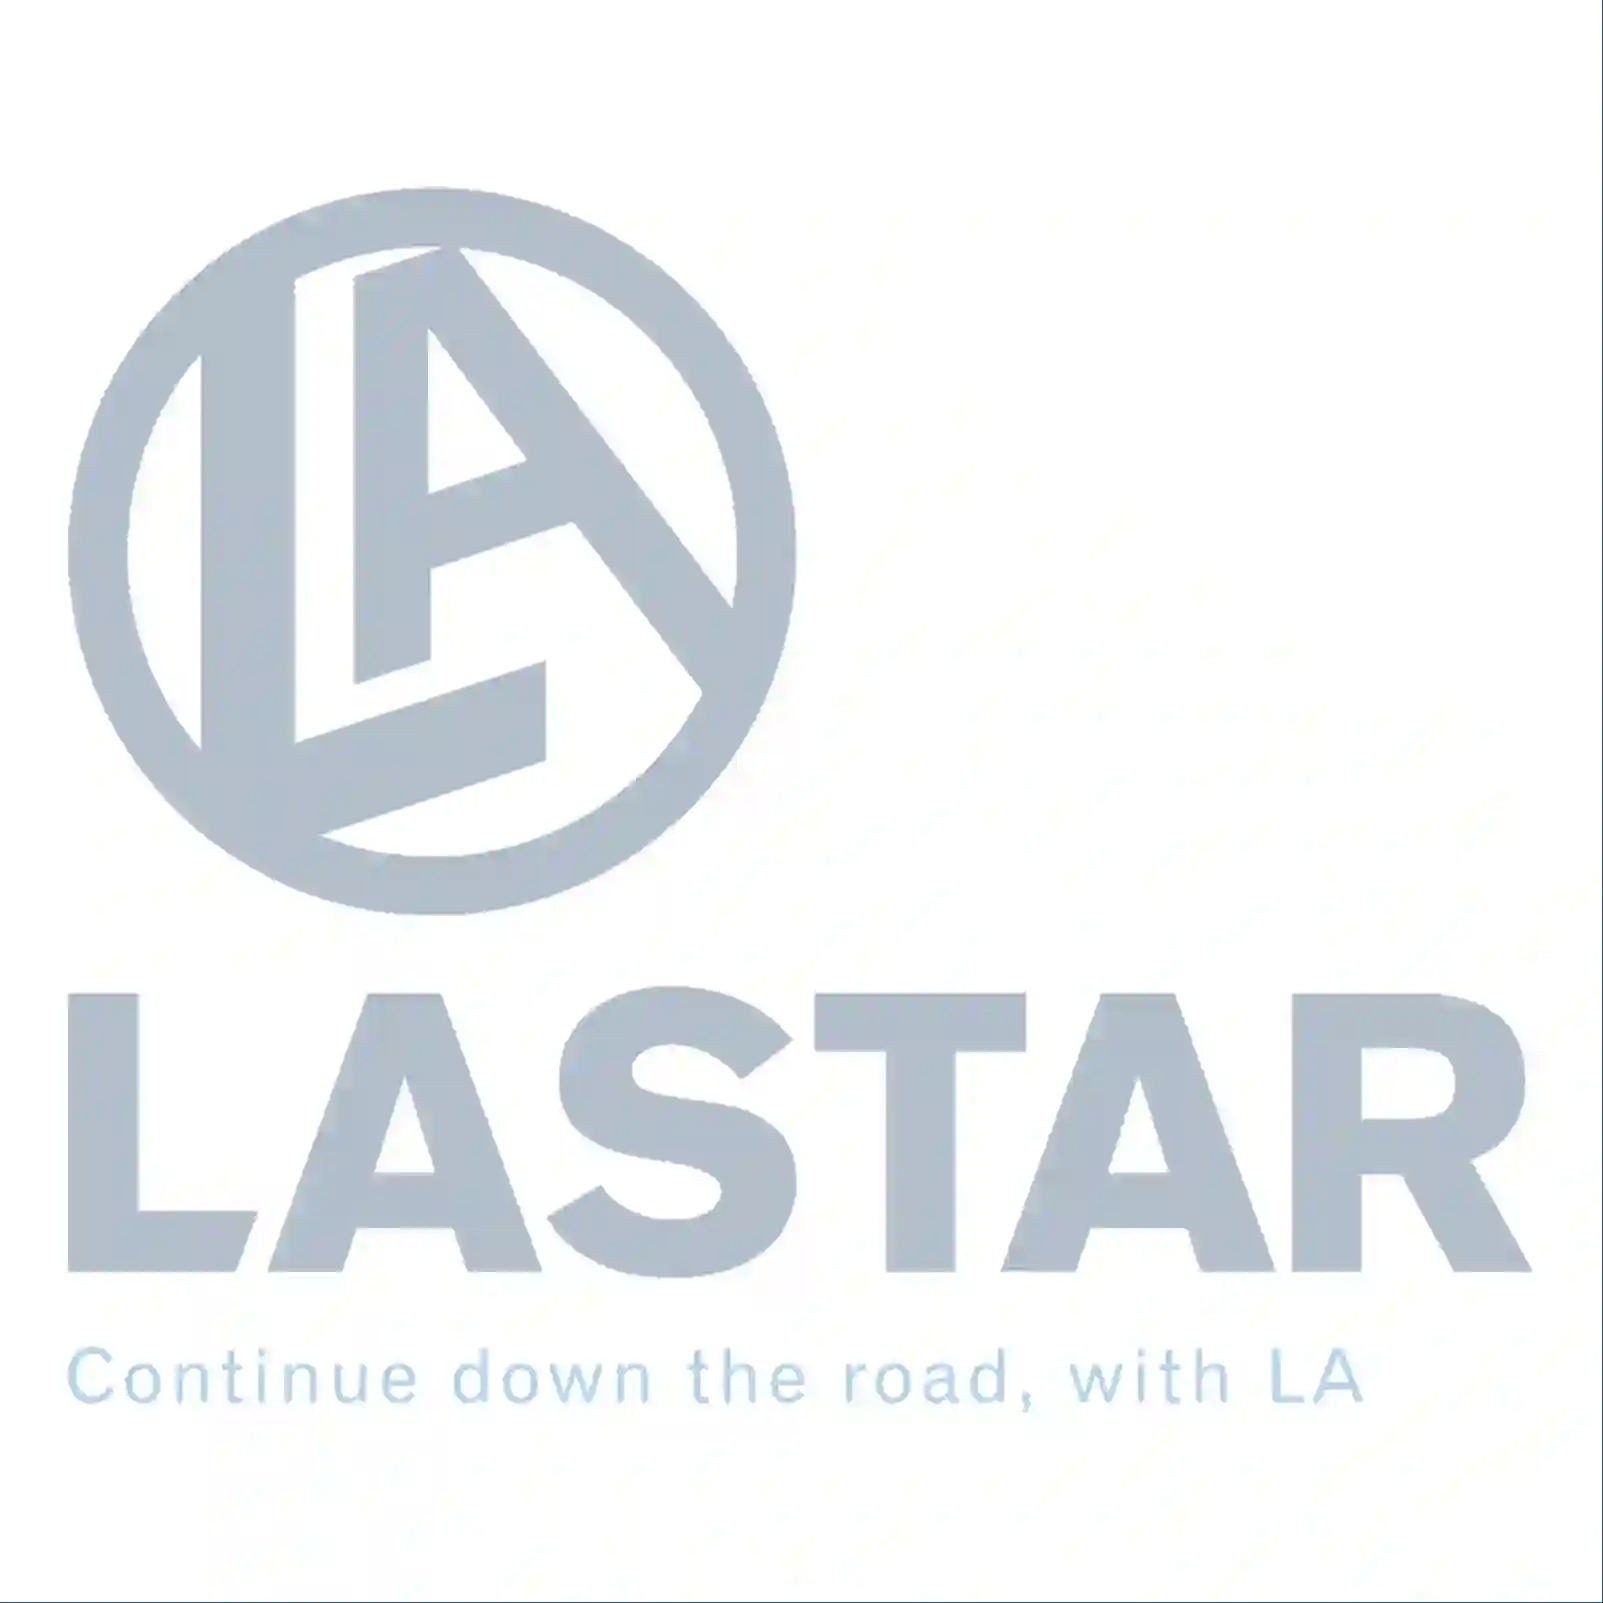  Assembly sleeve || Lastar Spare Part | Truck Spare Parts, Auotomotive Spare Parts